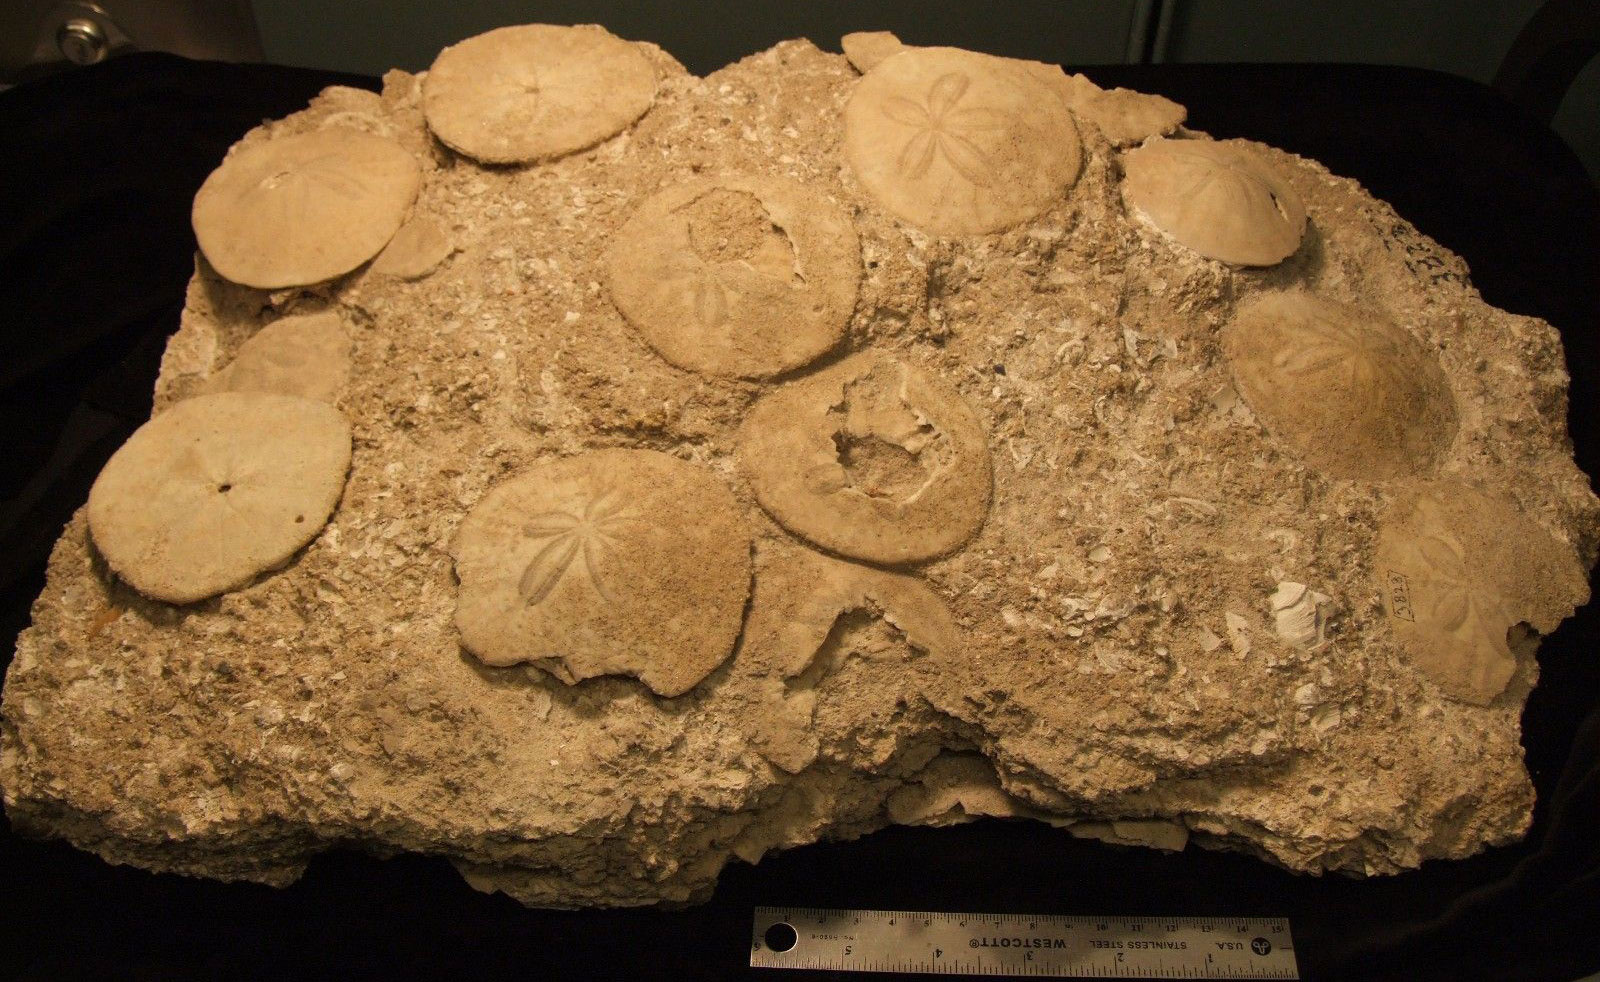 Photograph of sand dollars from the Pliocene of La Jolla, California. The specimen is a chunk of sandy rock matrix with fragments of bivalve shell embedded in it. Multiple large, relatively complete sand dollars are exposed on the surface. 